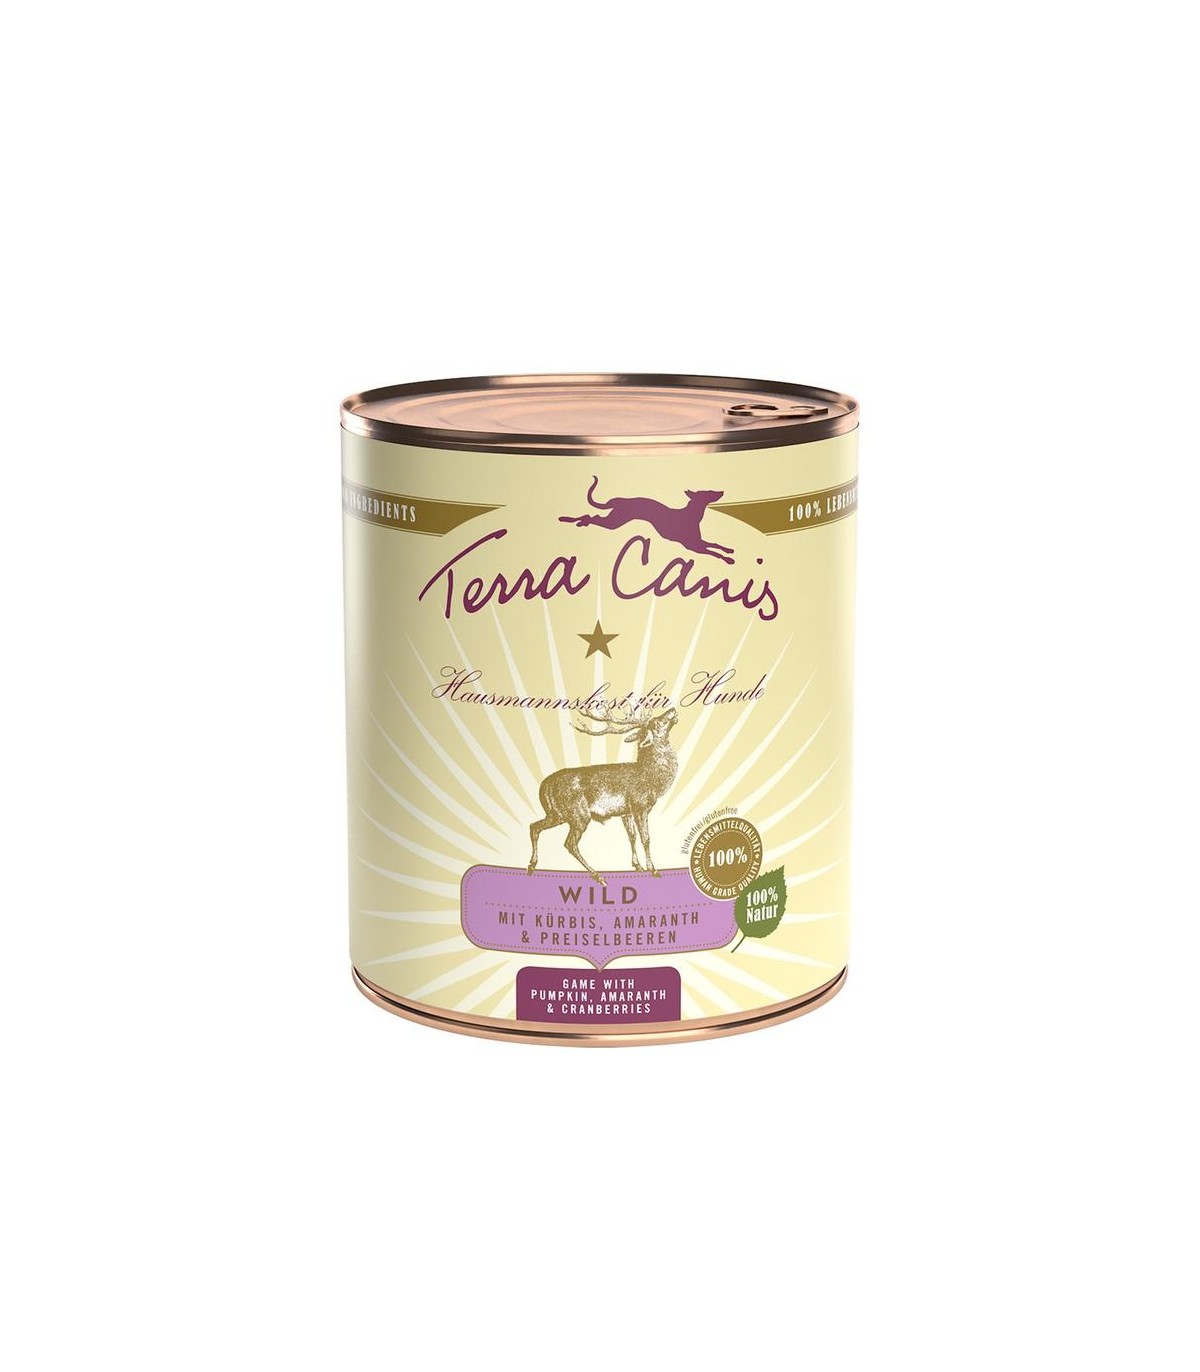 Image of TERRA CANIS CLASSIC SELVAGGINA 800G